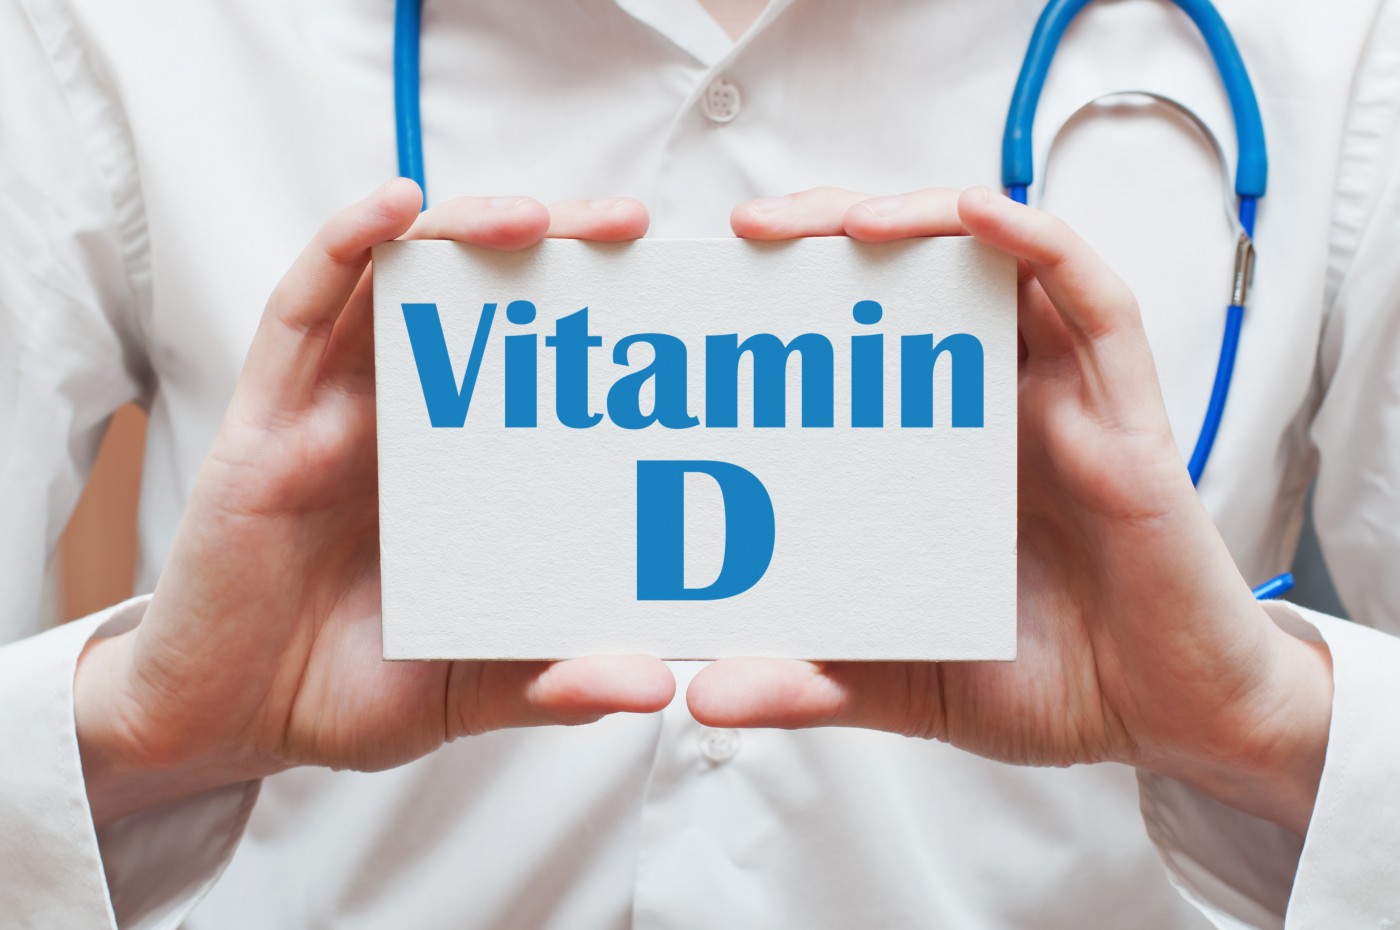 MS patients should take vitamin D supplements, even though research did not yet prove a protective effect.